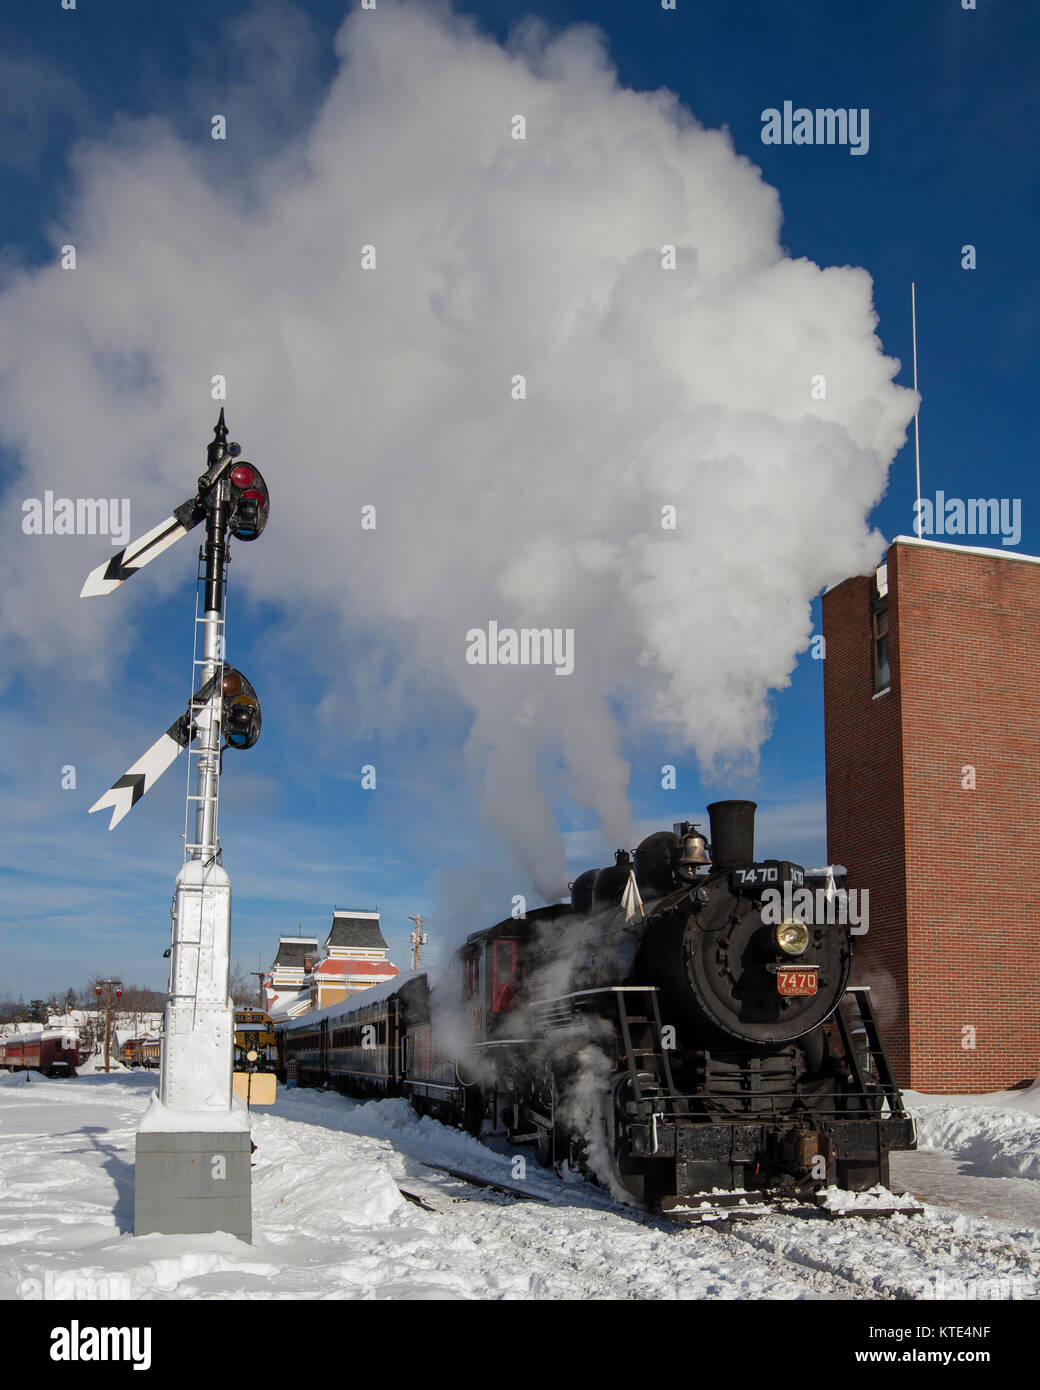 Steam engine in snow with railroad signal Stock Photo